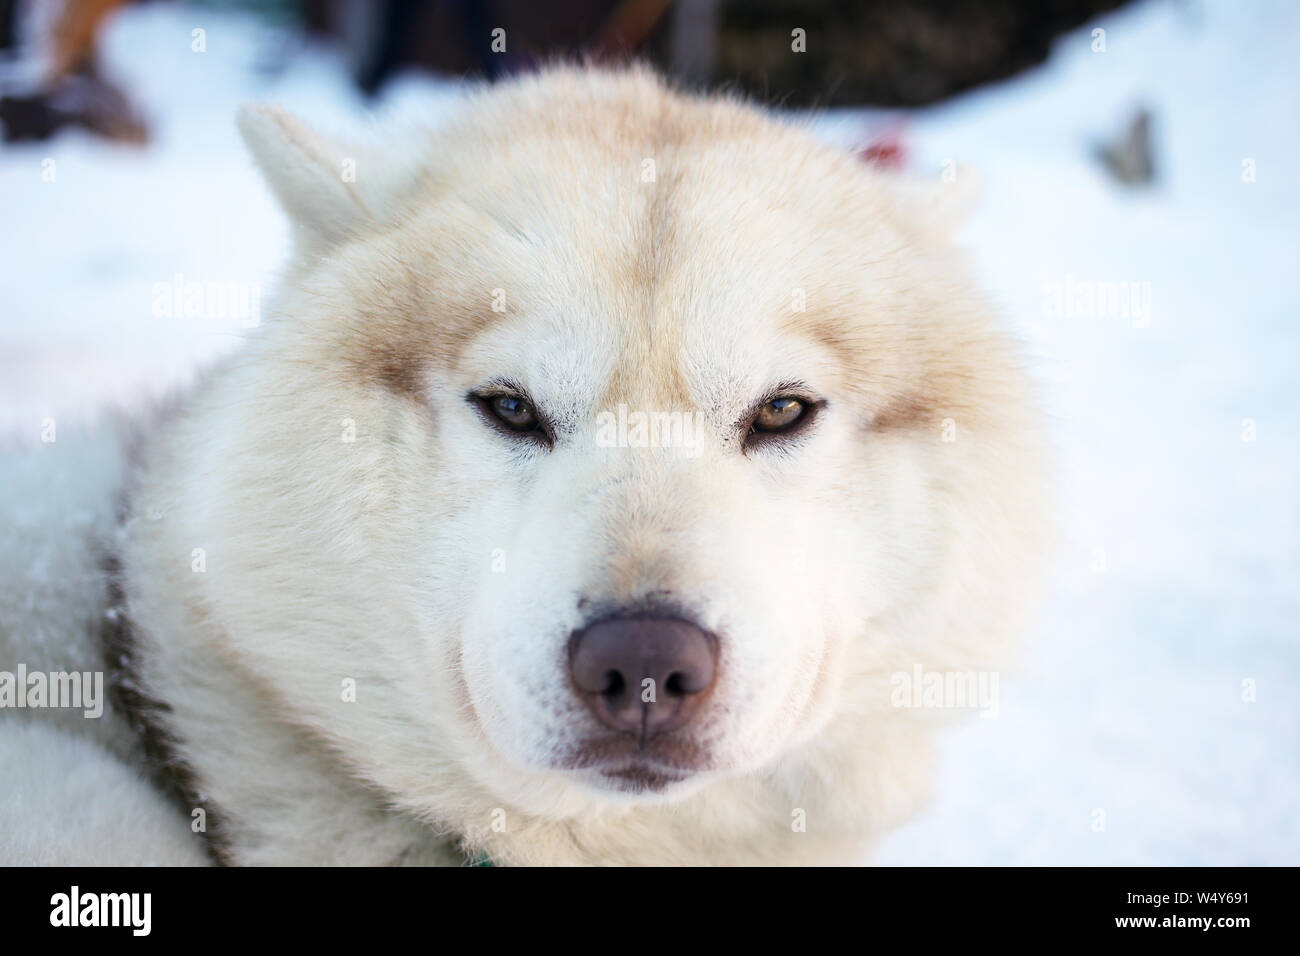 Ushuaia, Tierra del Fuego - July 19, 2019: Siberian Husky dog portrait on the snow in the Cotorras Winter Center in Ushuaia, Argentina Stock Photo